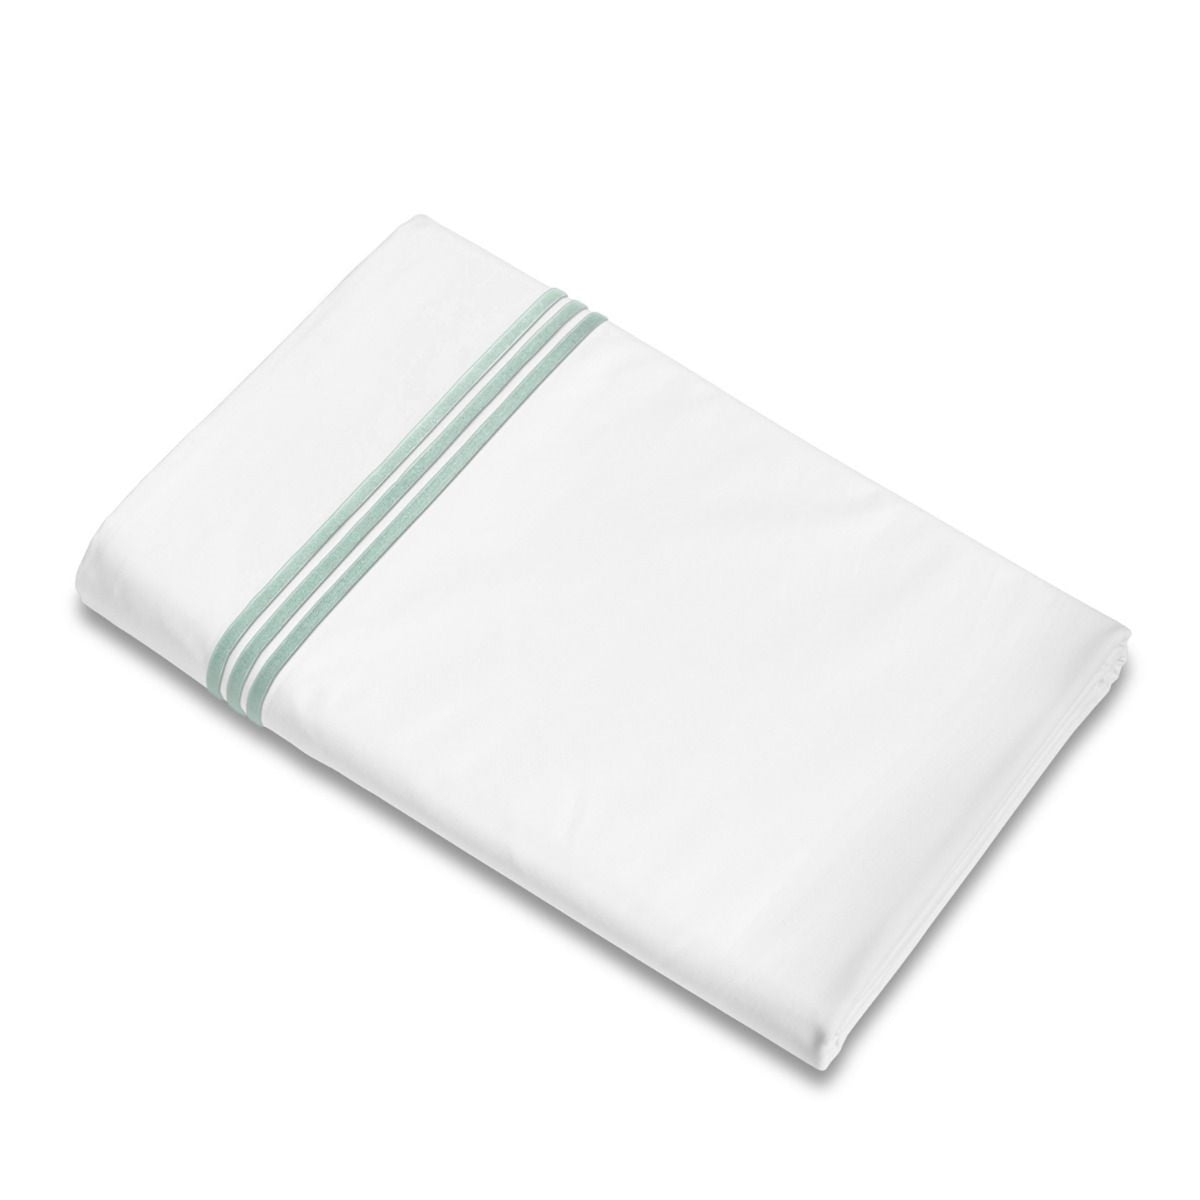 Flat Sheet of Signoria Platinum Percale Bedding in White/Silver Sage Color